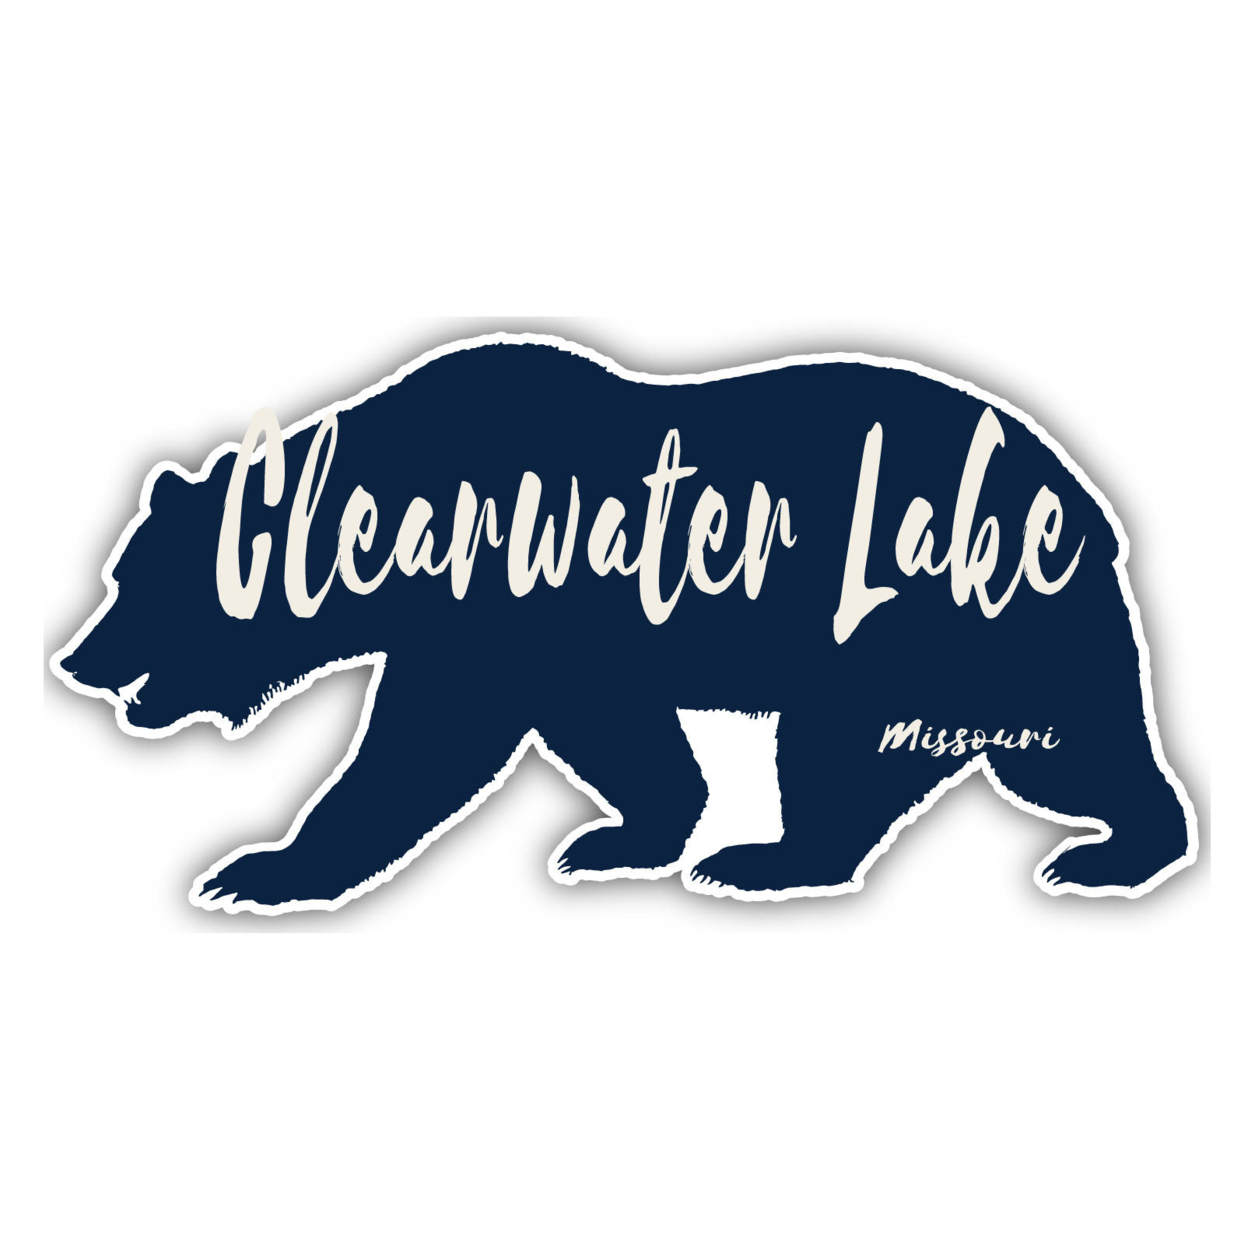 Clearwater Lake Missouri Souvenir Decorative Stickers (Choose Theme And Size) - 4-Pack, 12-Inch, Bear